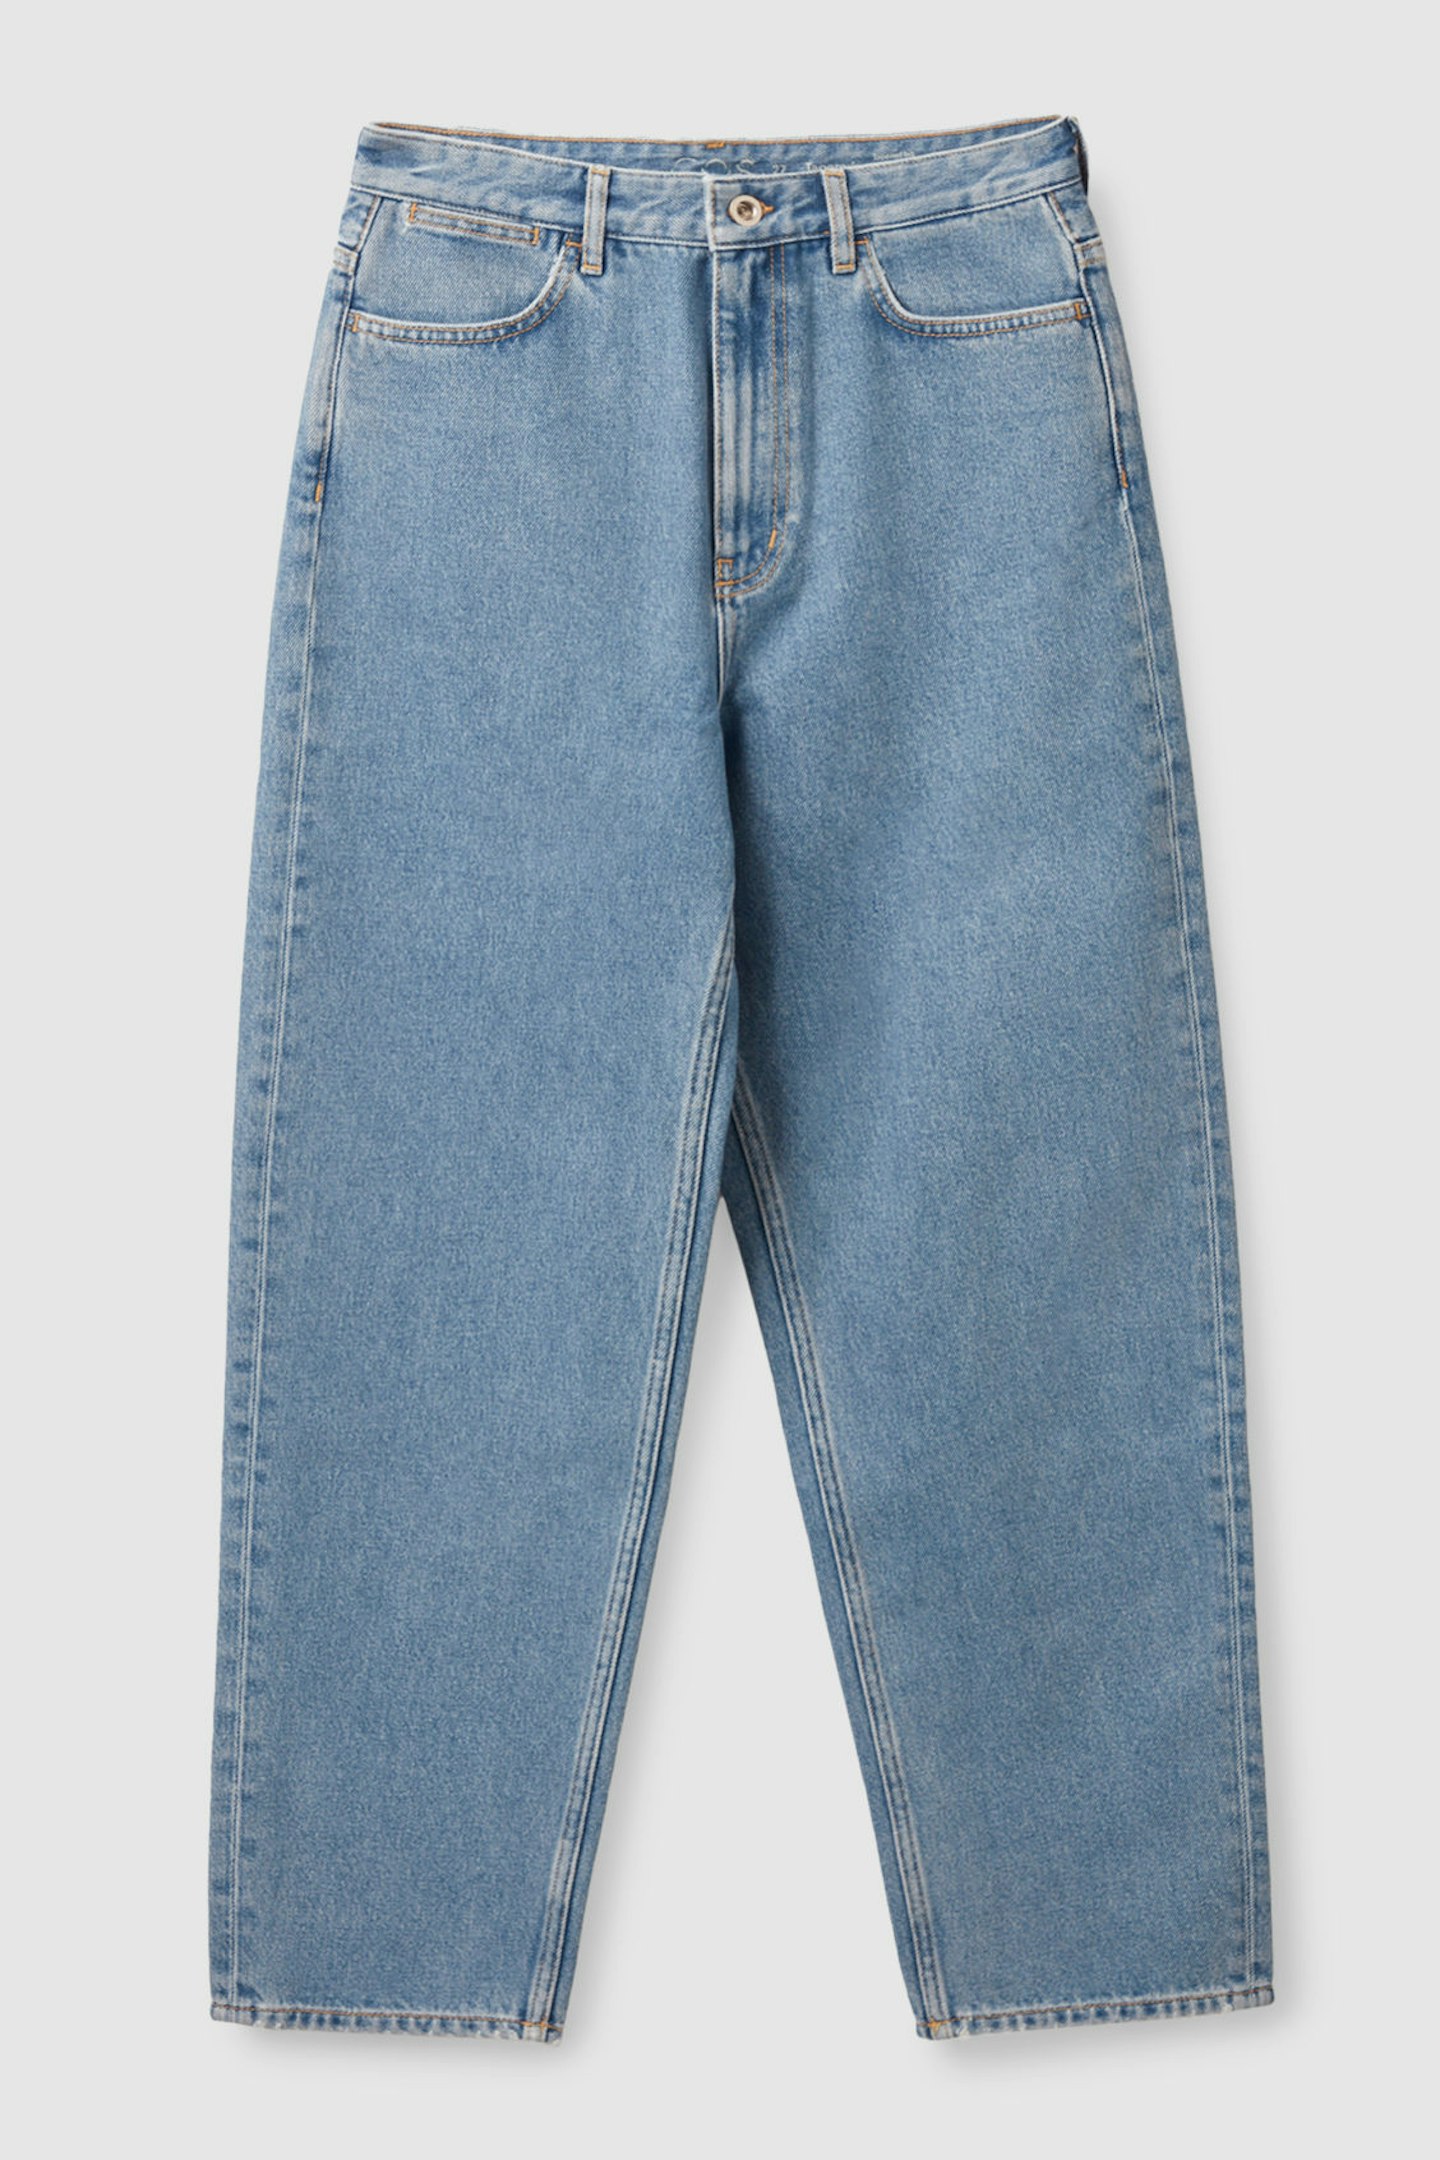 COS, Tapered High-Rise Jeans, £69